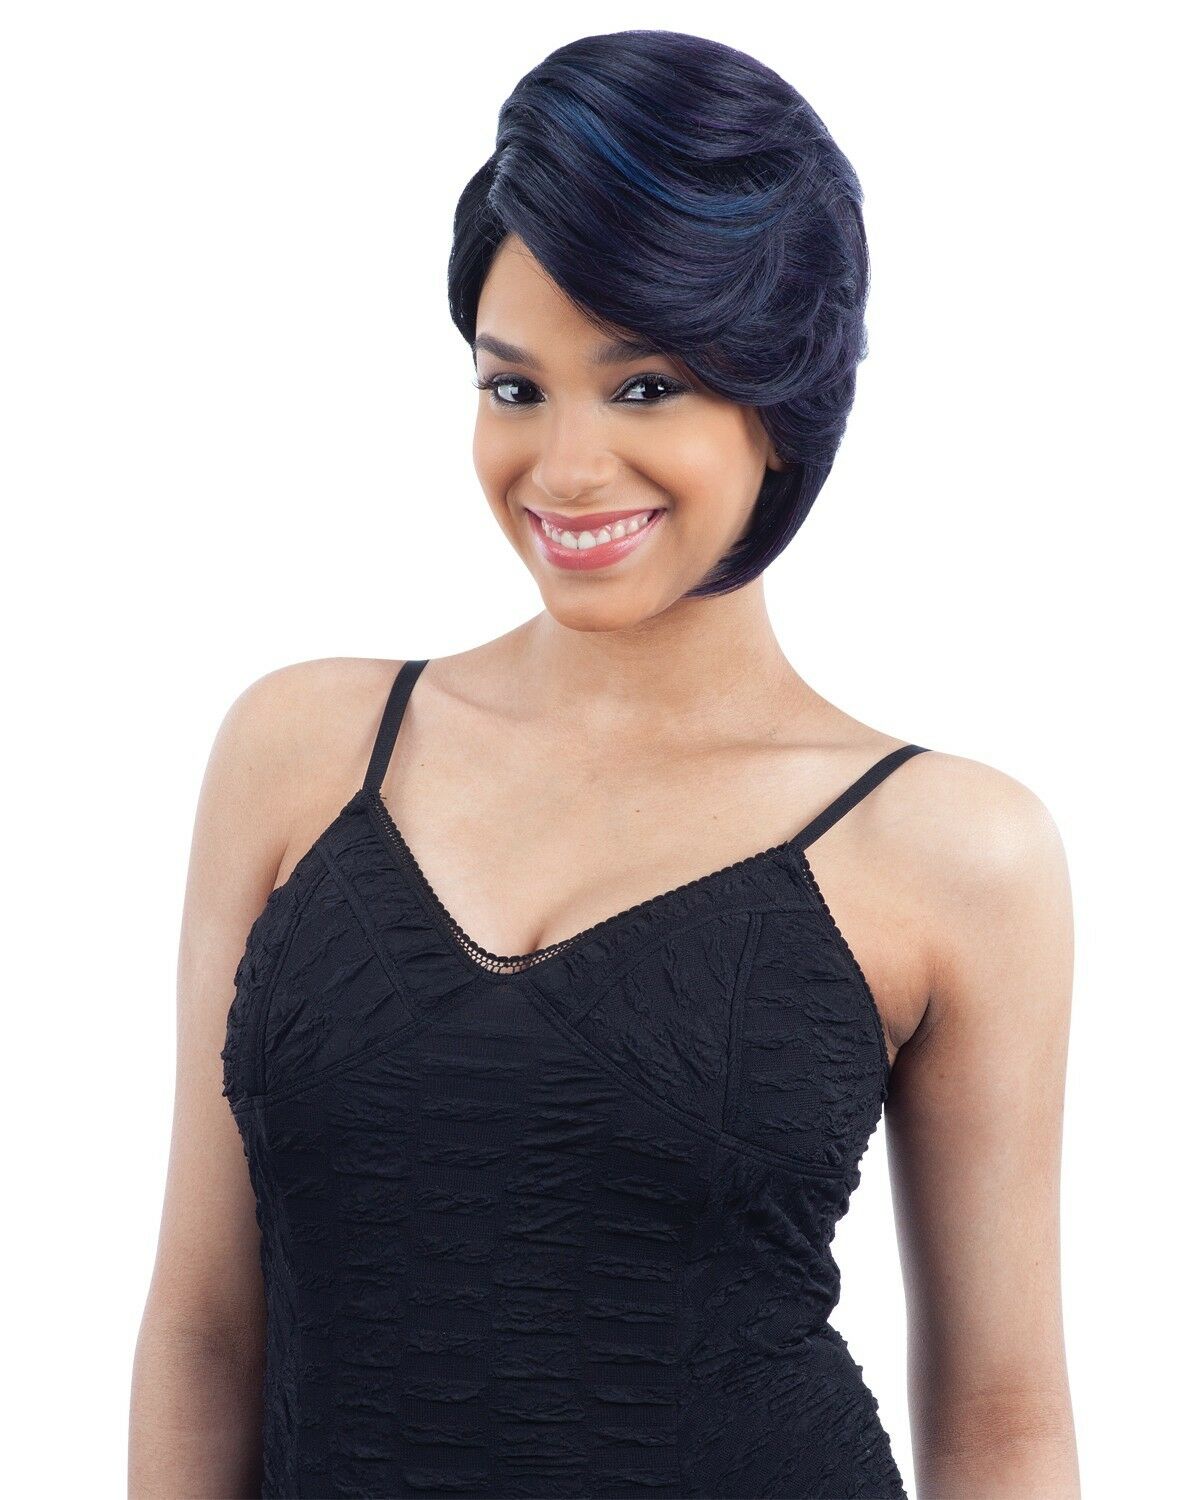 FREETRESS EQUAL SYNTHETIC 6 INCH LACE PART SHORT HAIR WIG MACHELL